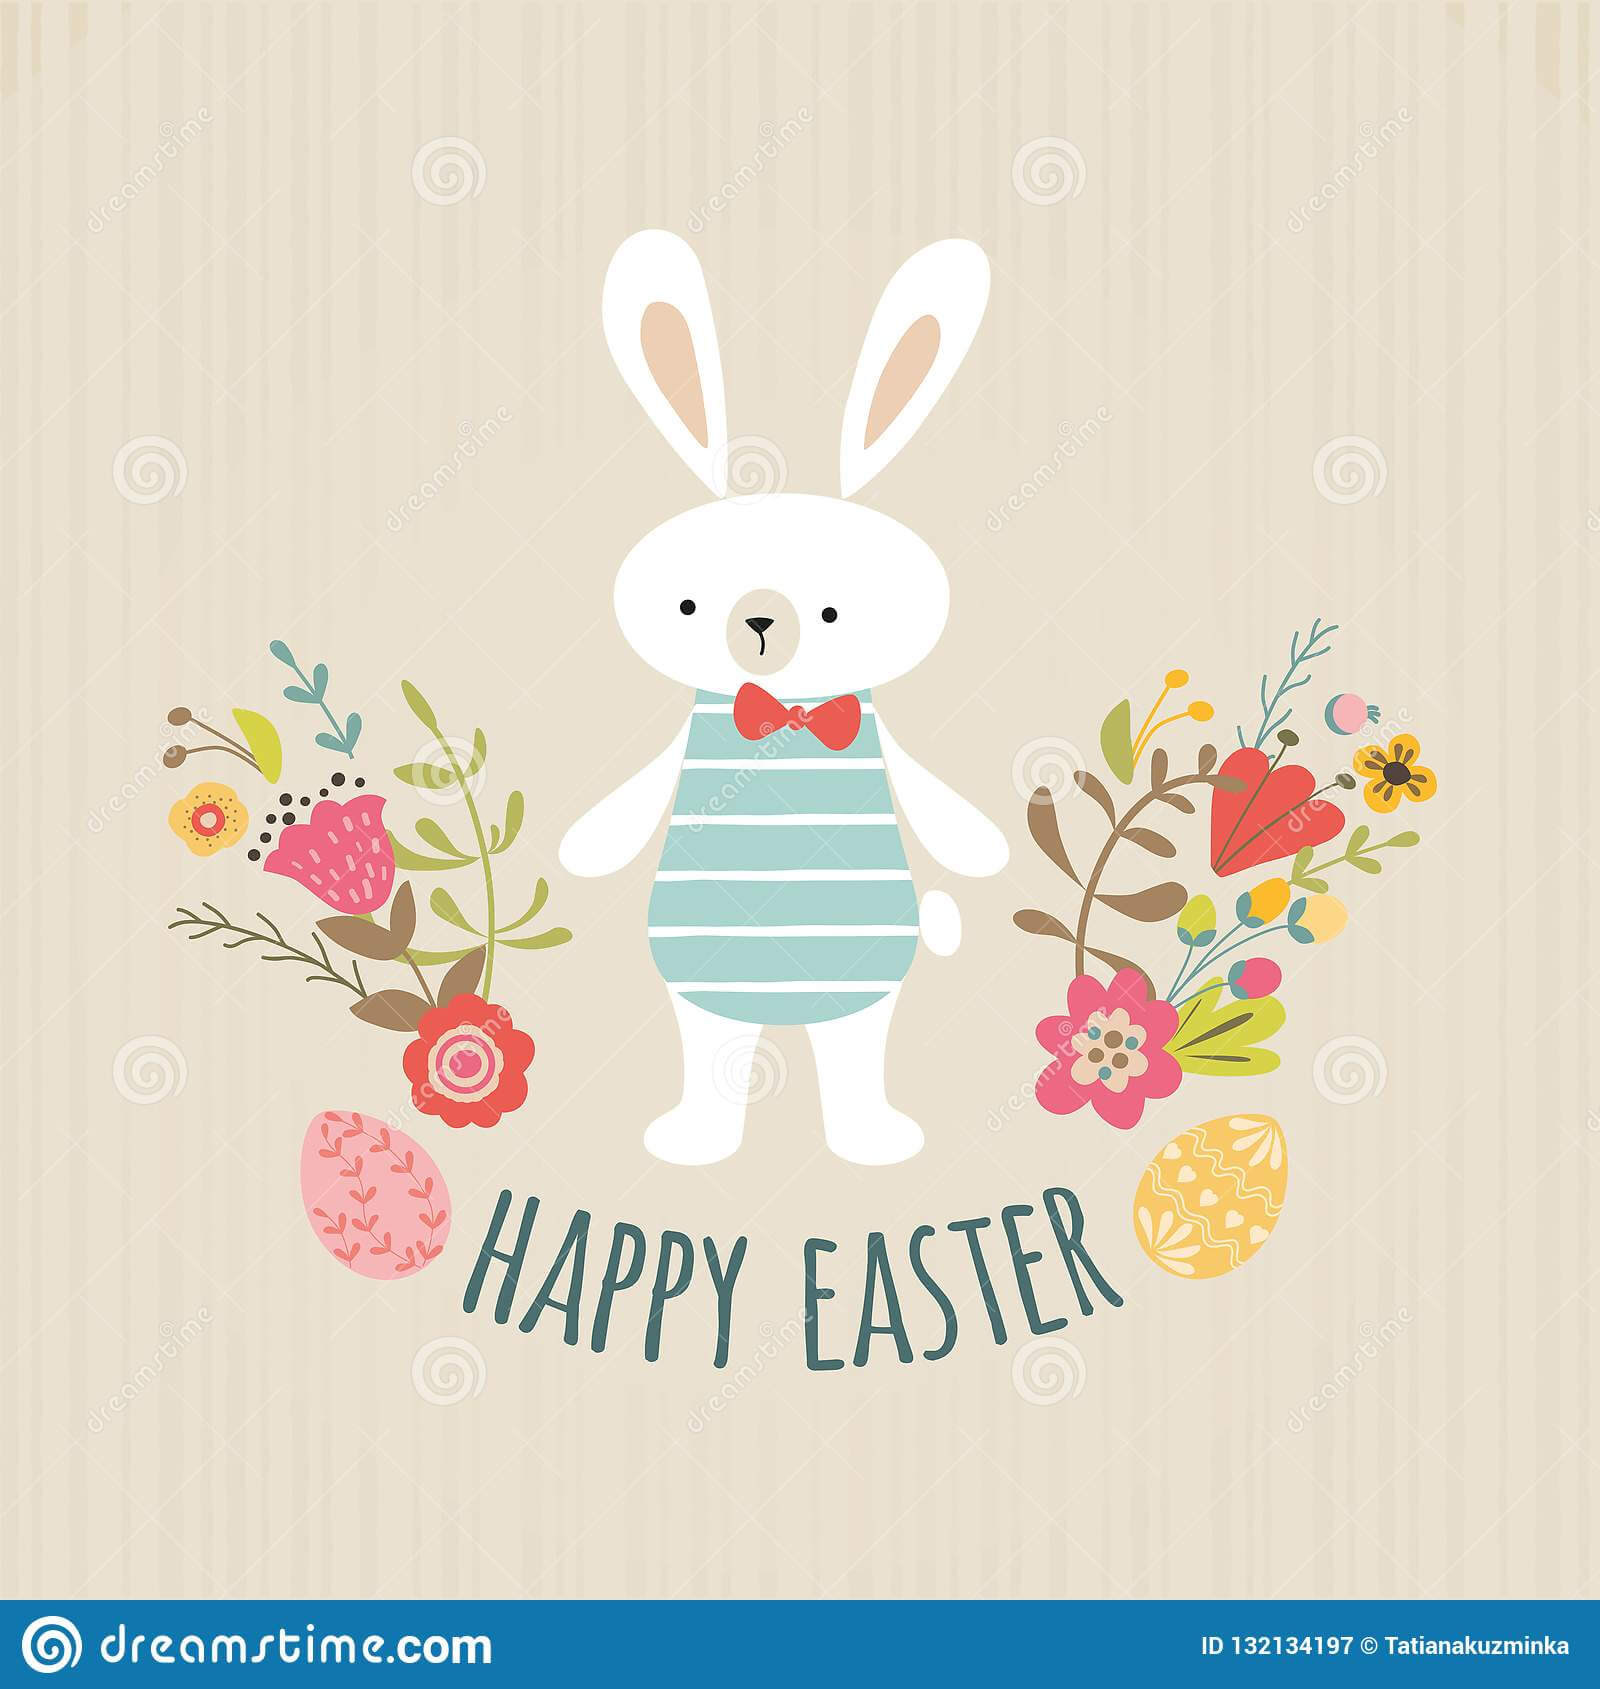 Cute Happy Easter Template With Eggs, Flowers, Boy Rabbit Regarding Easter Chick Card Template